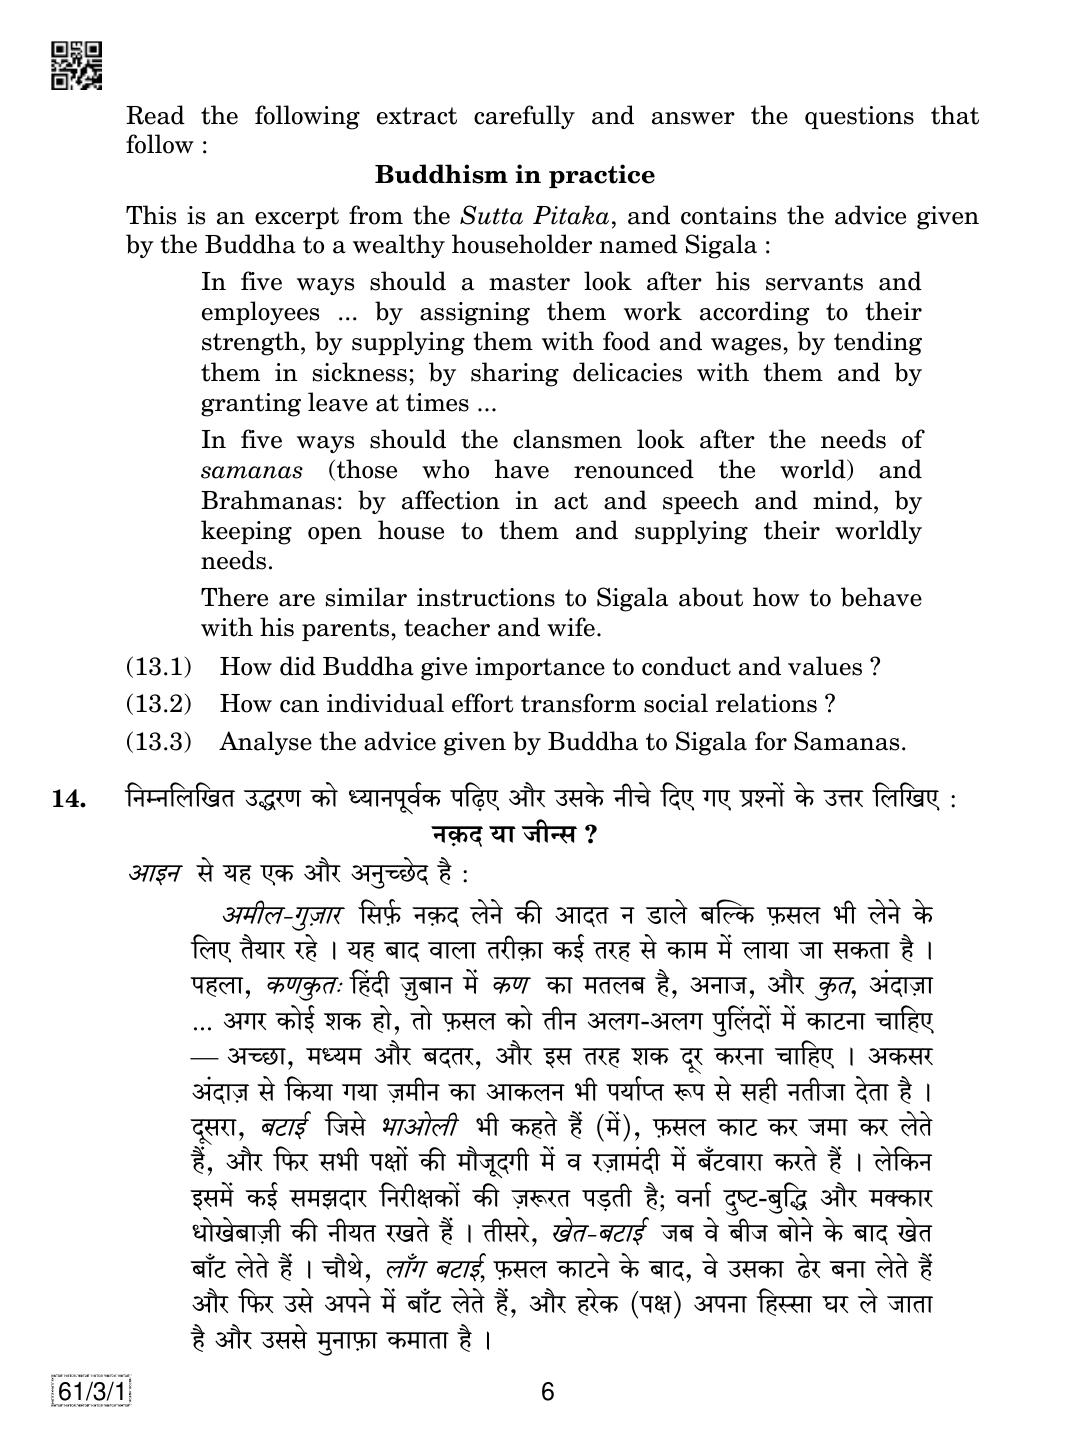 CBSE Class 12 61-3-1 History 2019 Question Paper - Page 6